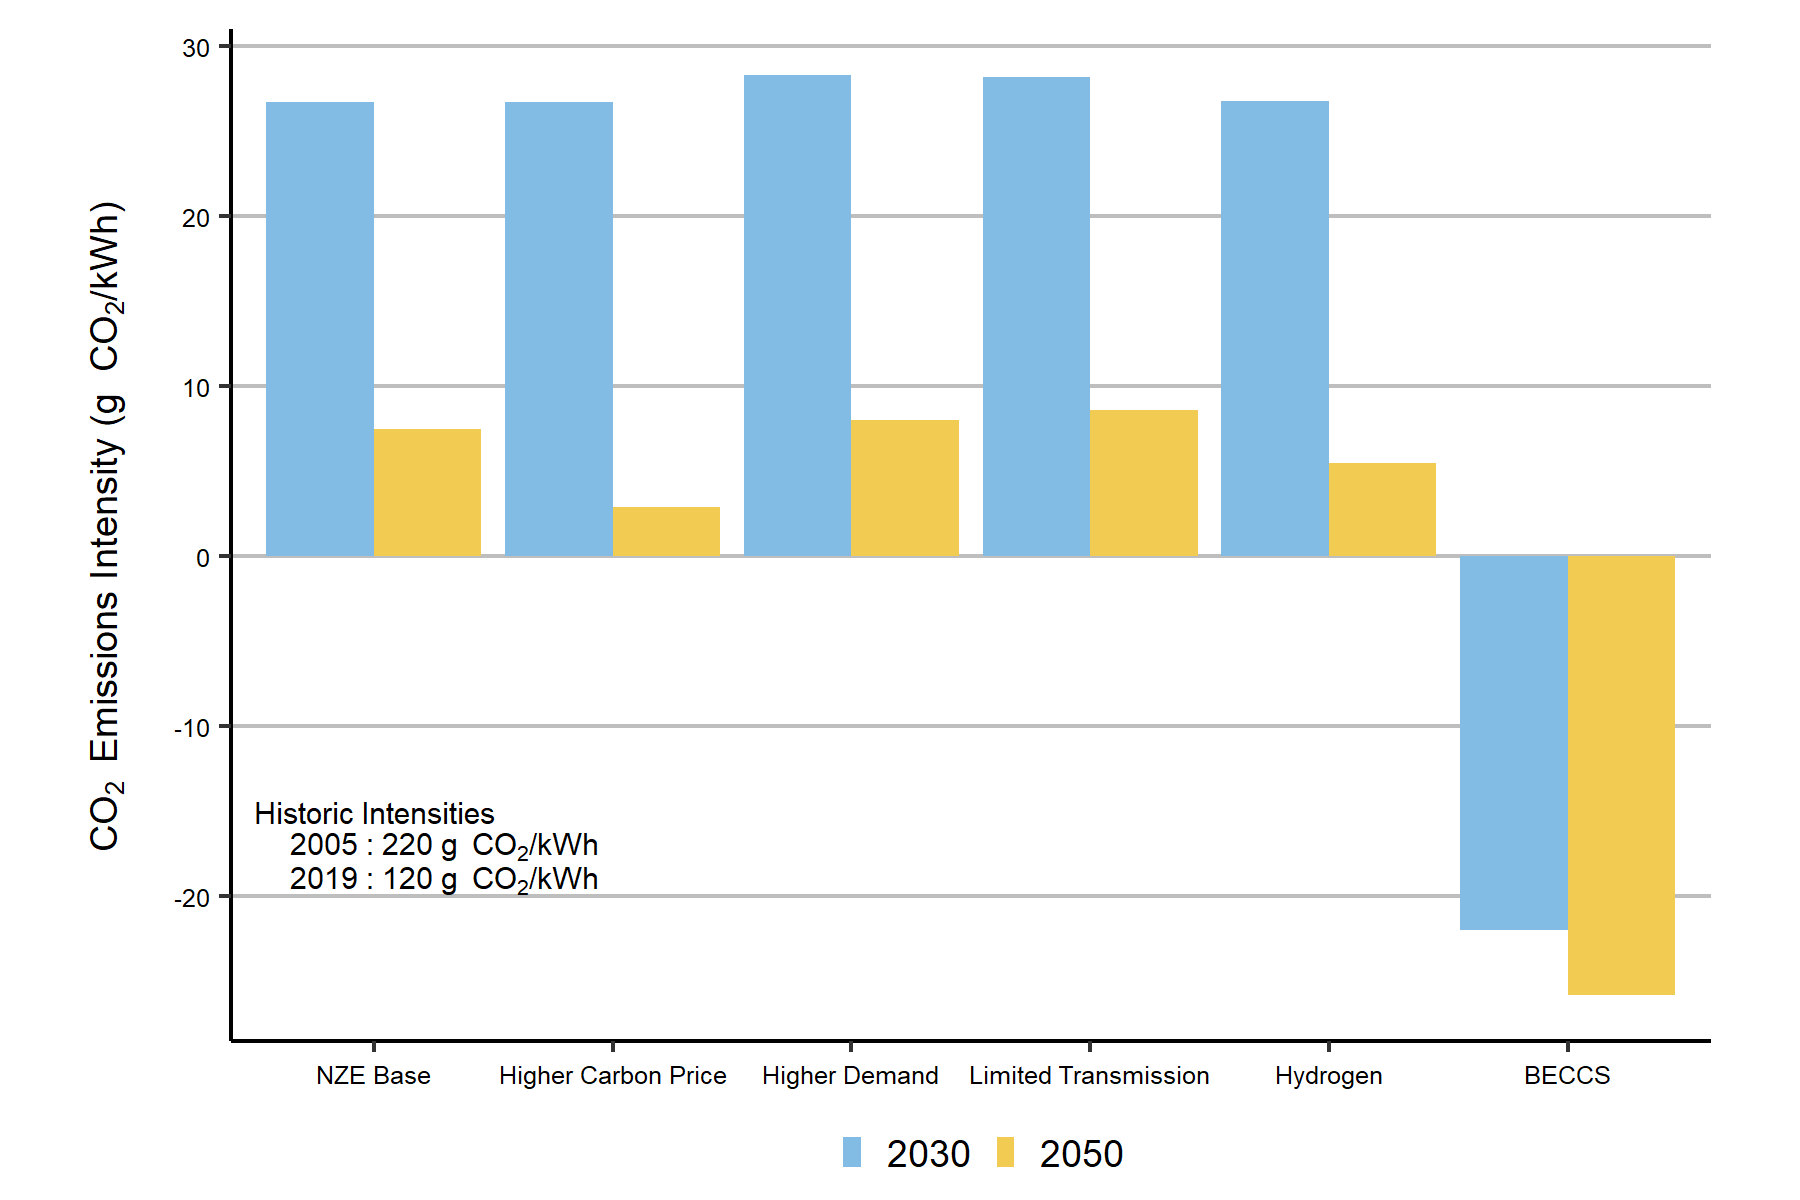 GHG Emissions Intensity of the Electricity Sector in Canada in Different Scenarios